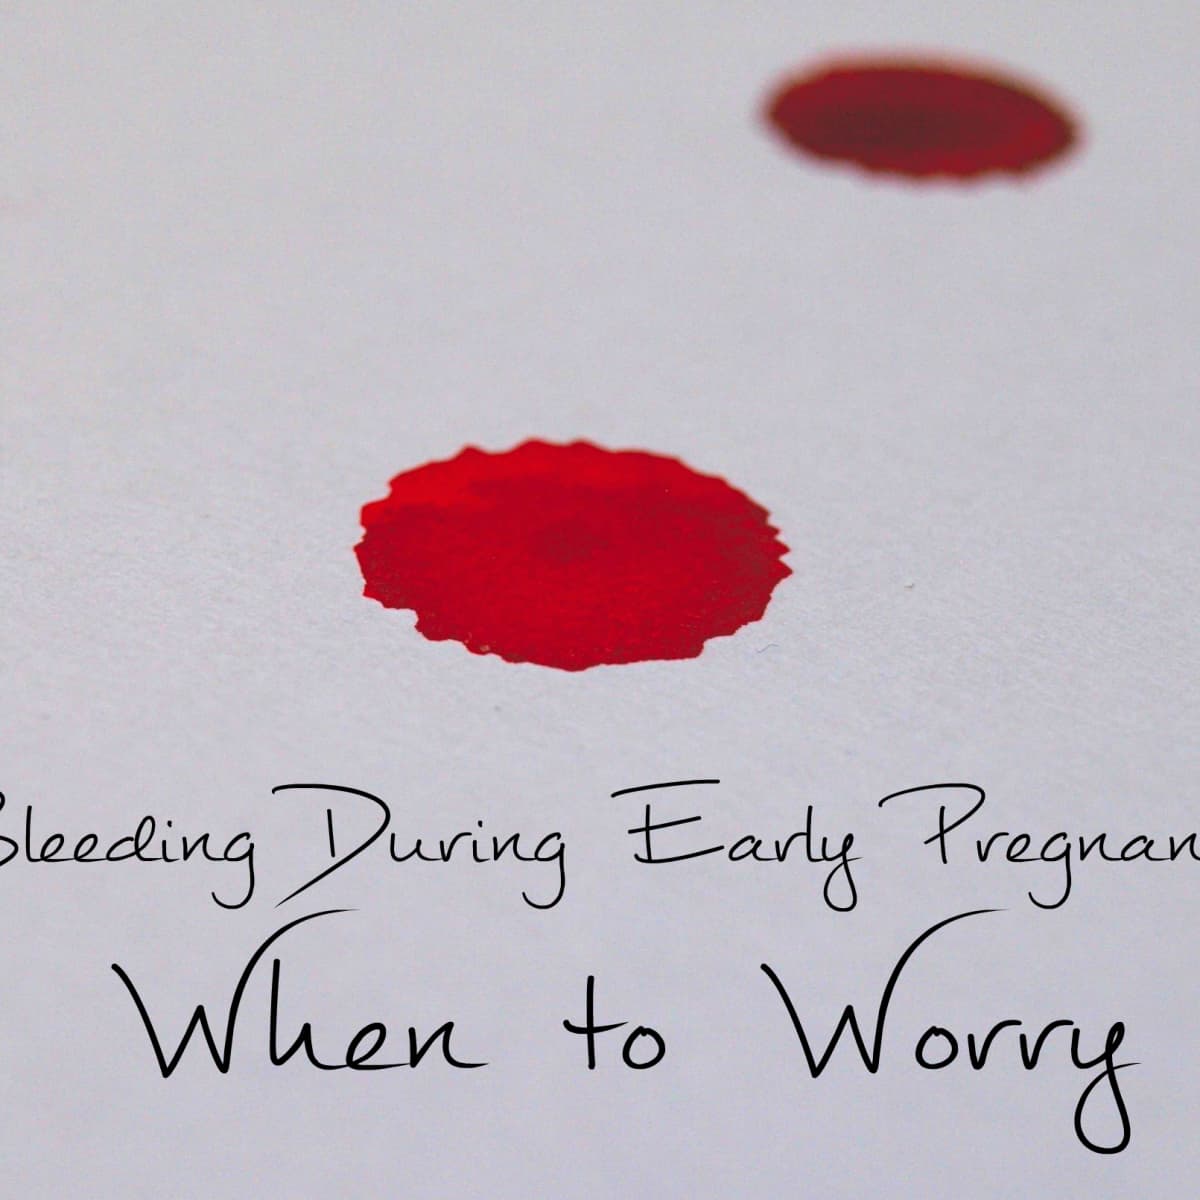 Bloody Pregnant Porn - Bleeding or Spotting in Early Pregnancy: Should I Be Worried? - WeHaveKids